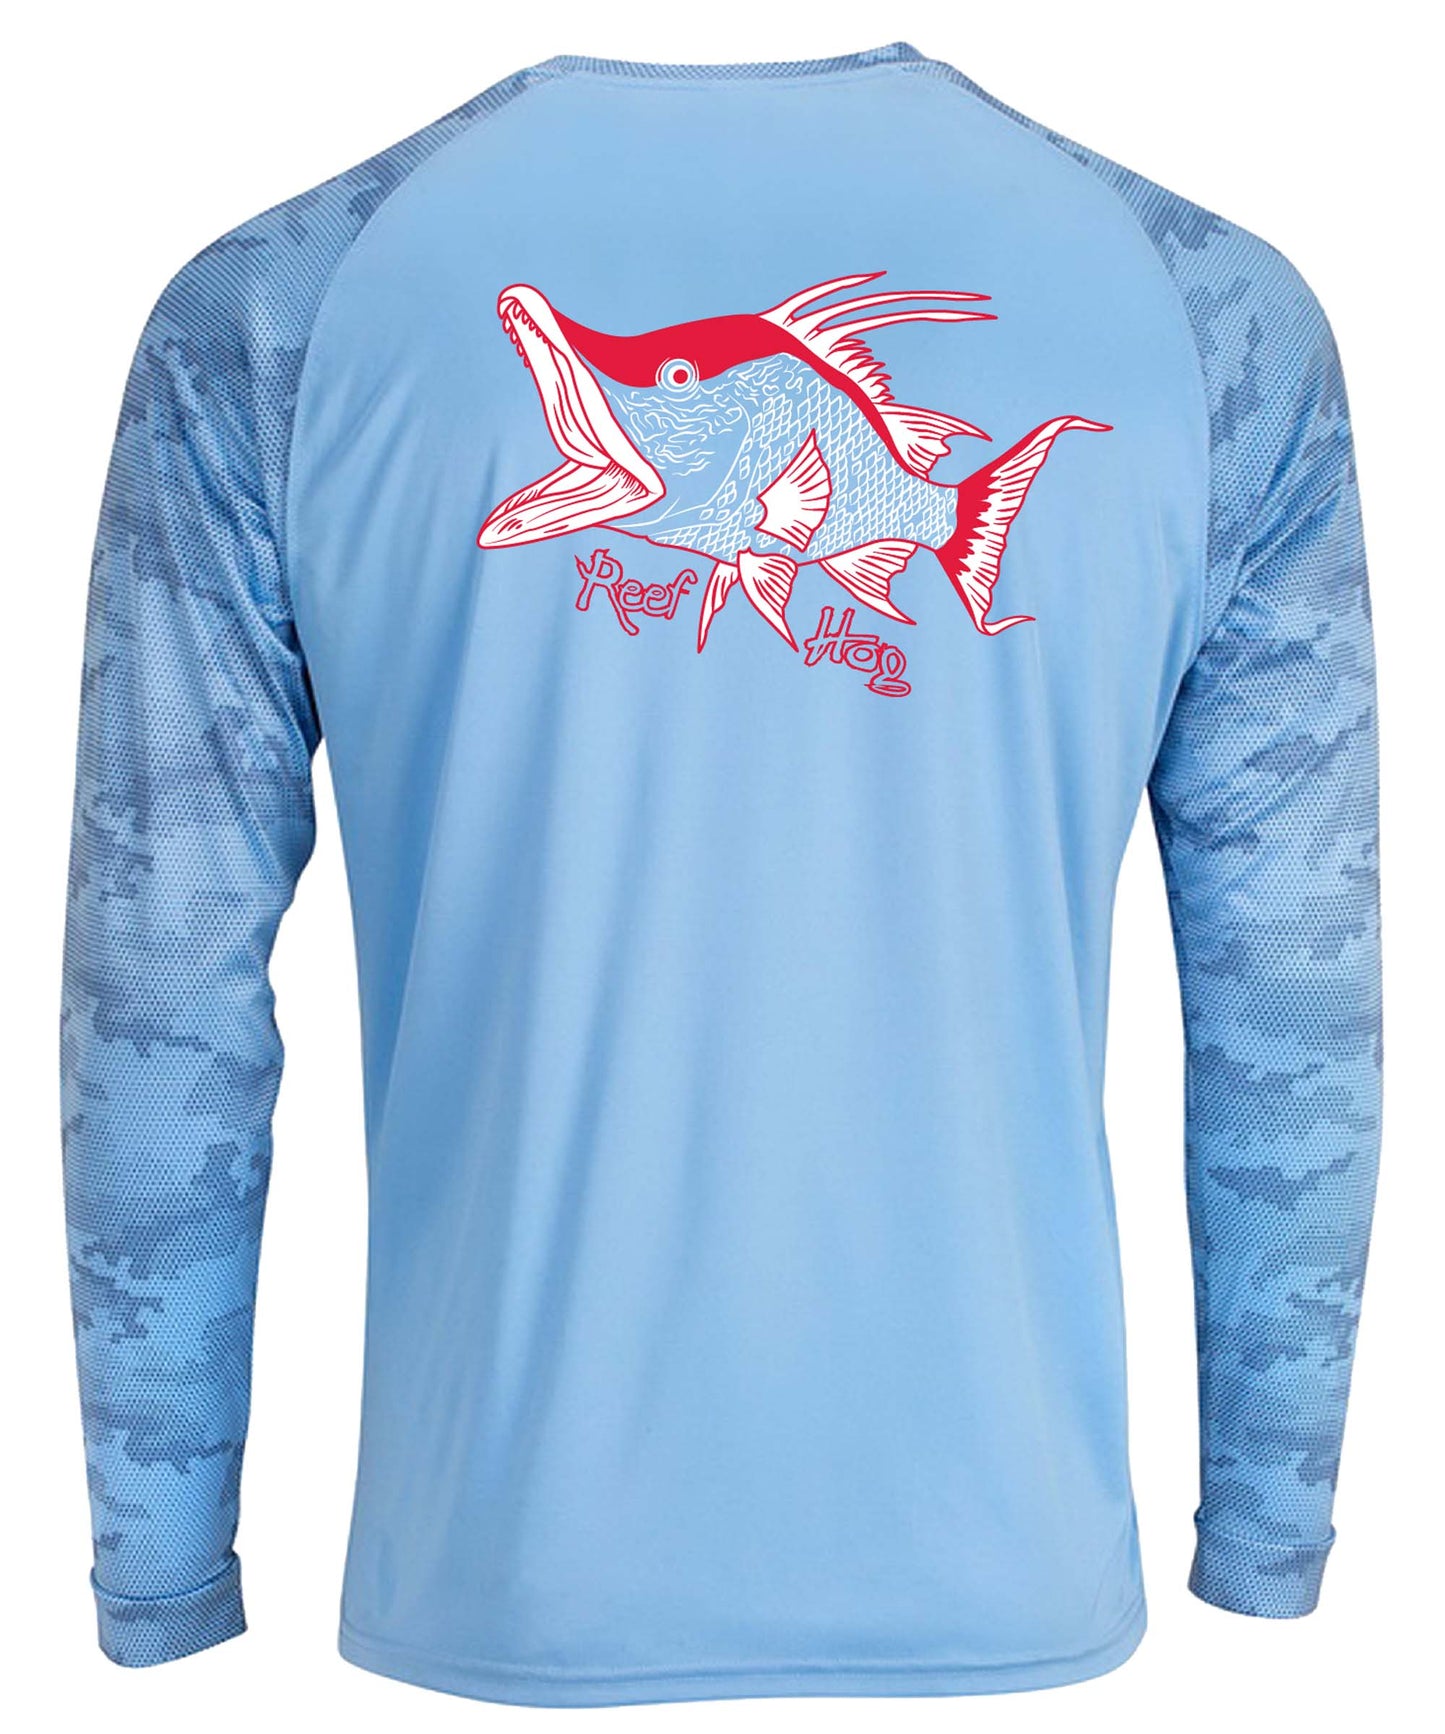 Blue Mist Digital Camo Long Sleeve Hogfish Performance Dry-Fit Sun Protection Shirt with 50+ UV Protection by Reel Fishy Apparel